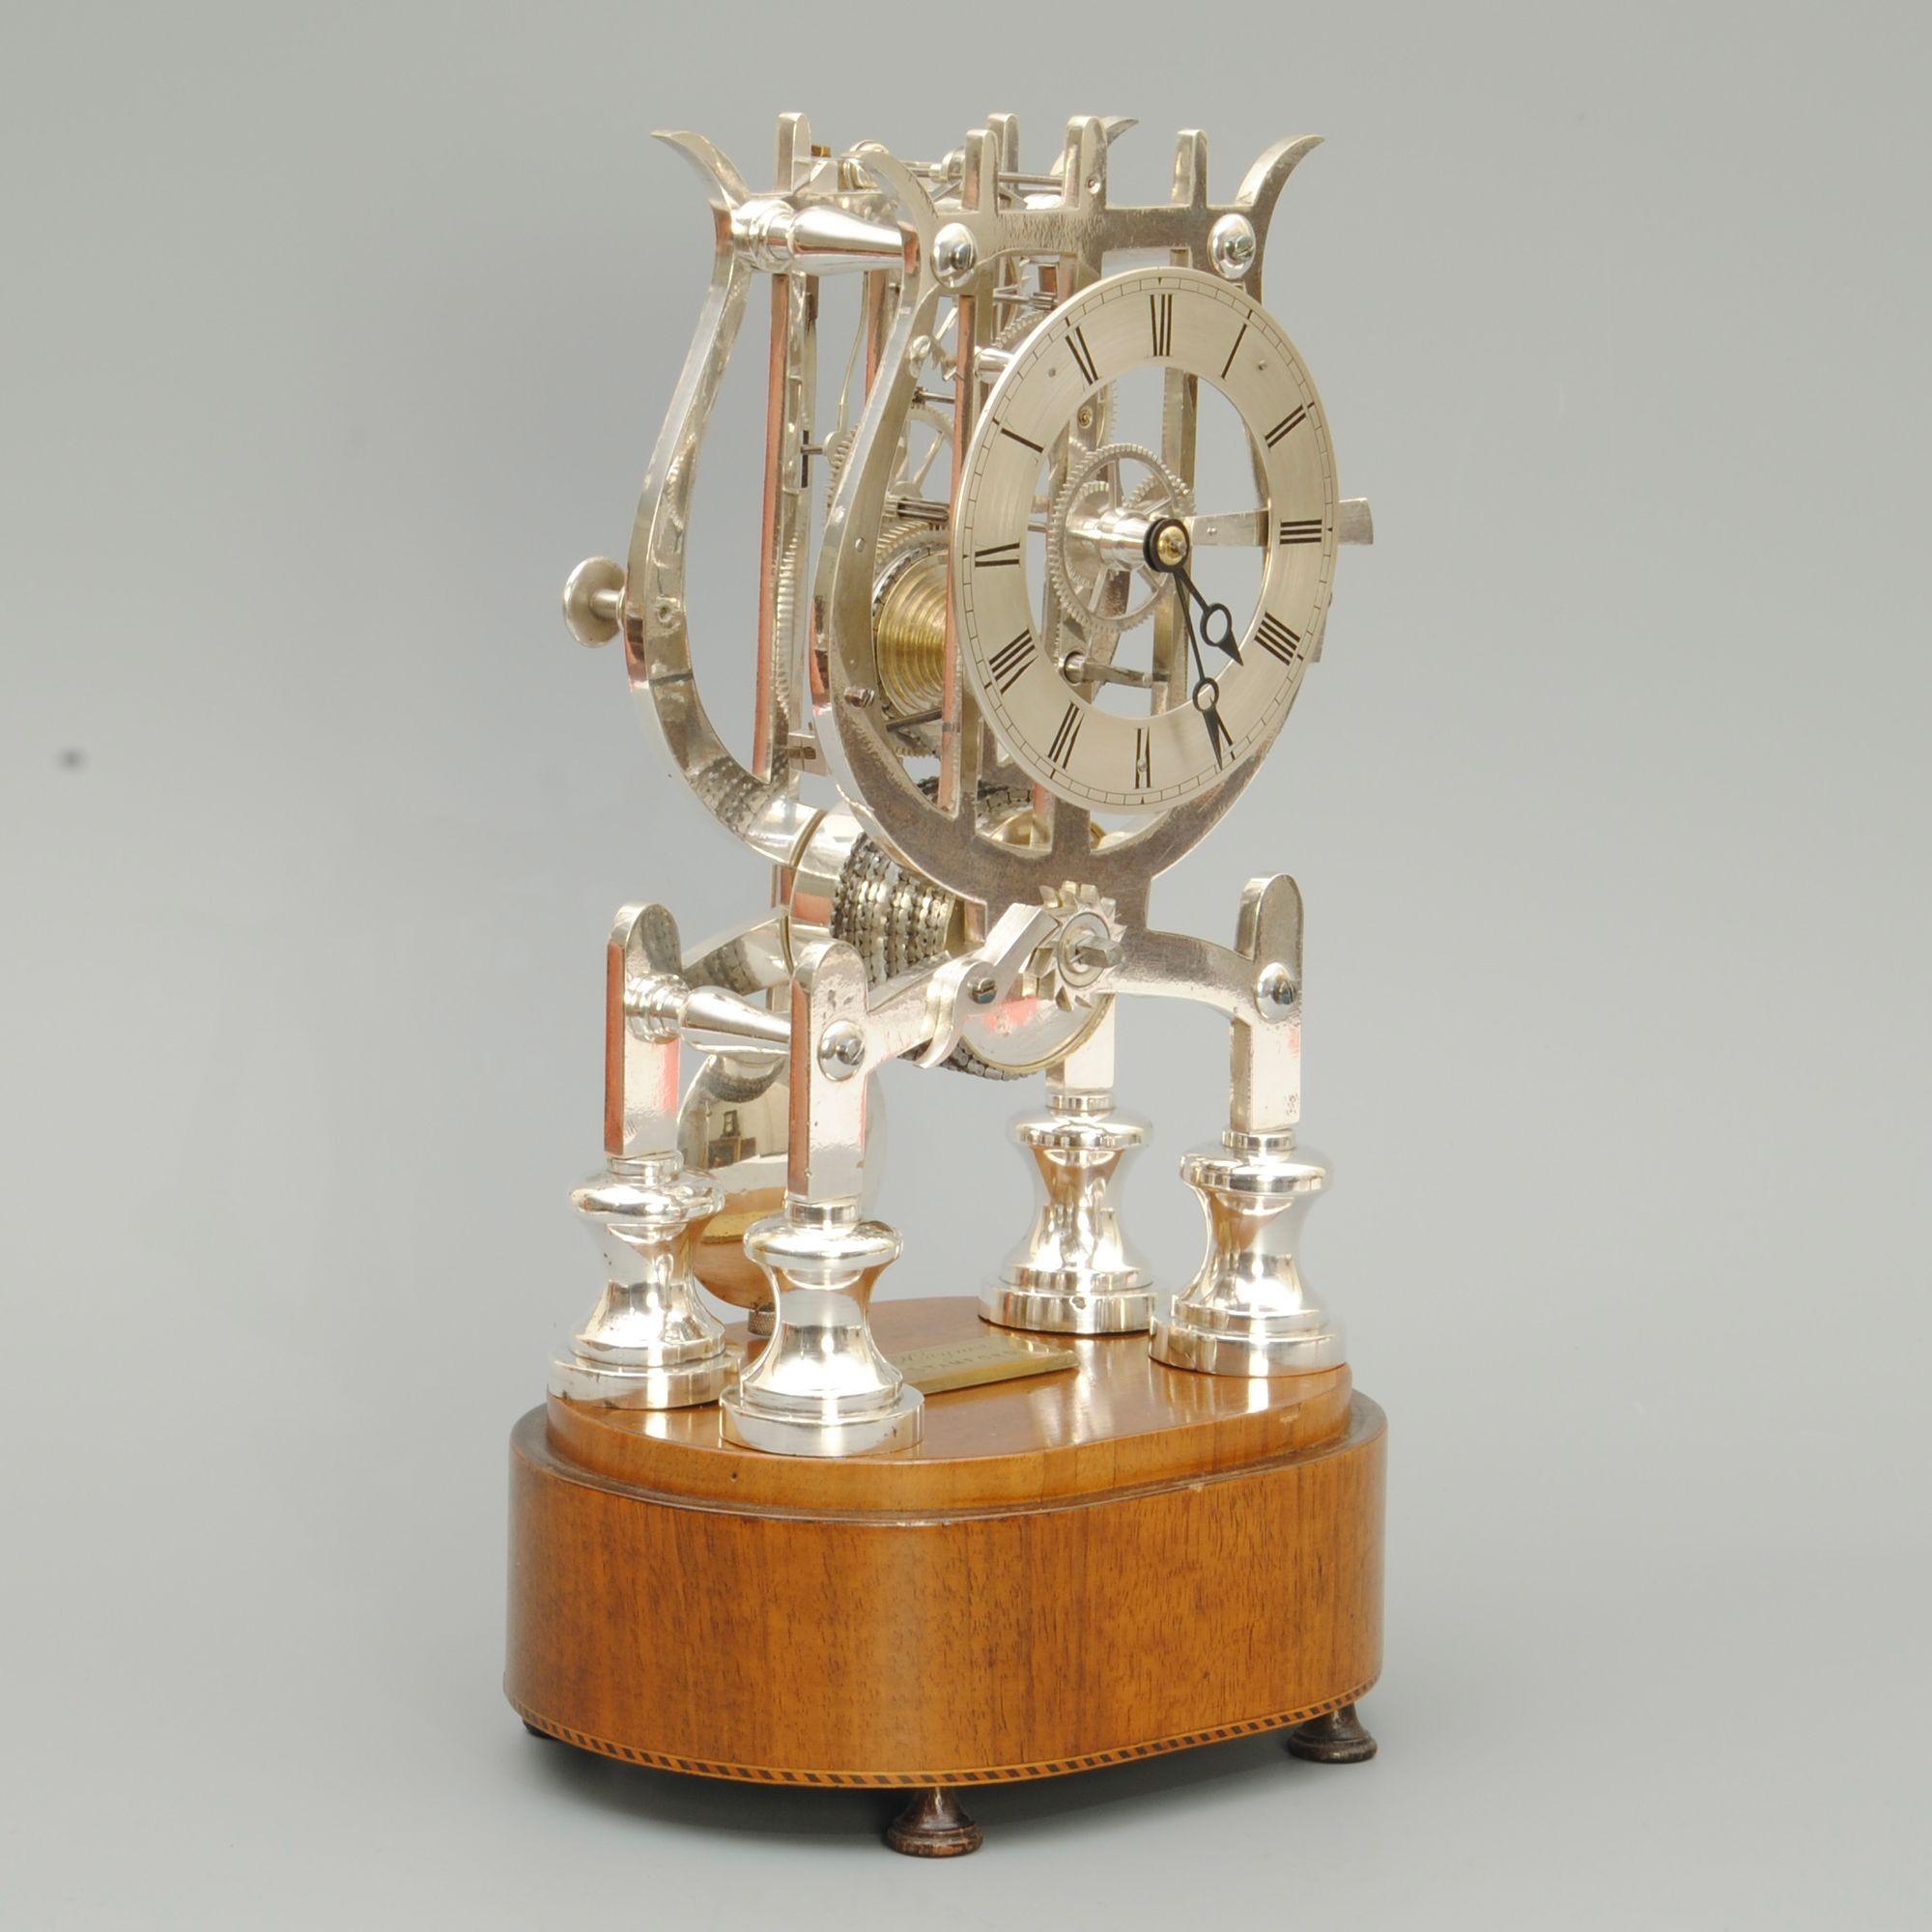 A super lyre-shaped mid 19th century skeleton clock by Haynes of Stamford, with the original mahogany base having an engraved makers plaque, with the origial glass dome.
This is a fine quality and unusual clock been silvered rather than lacquered